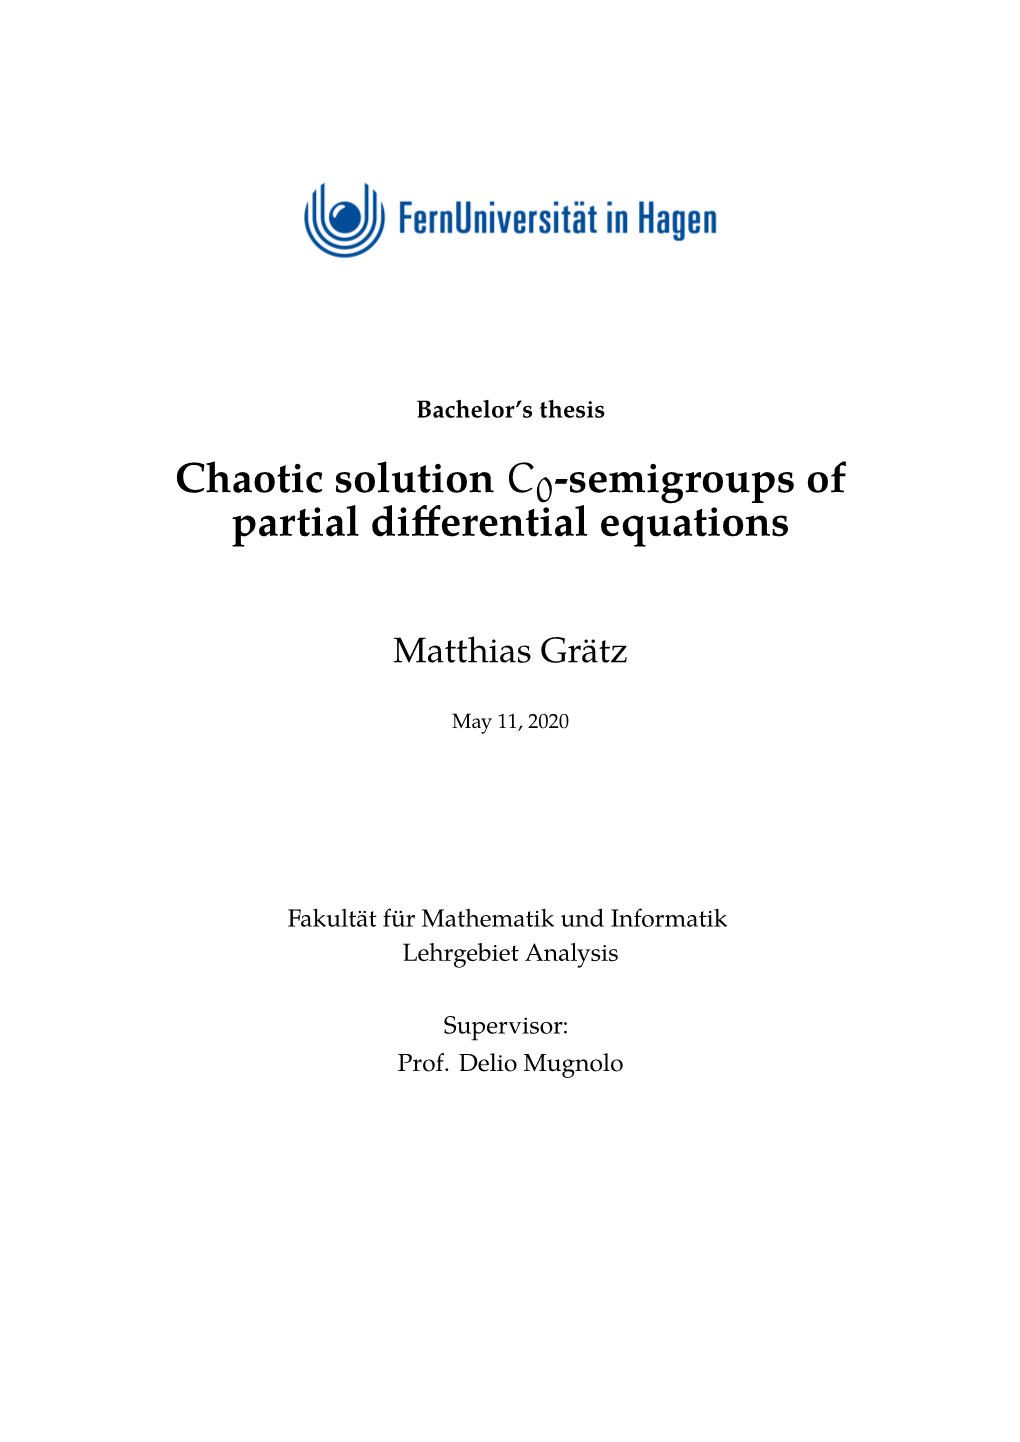 Chaotic Solution C0 -Semigroups of Partial Differential Equations